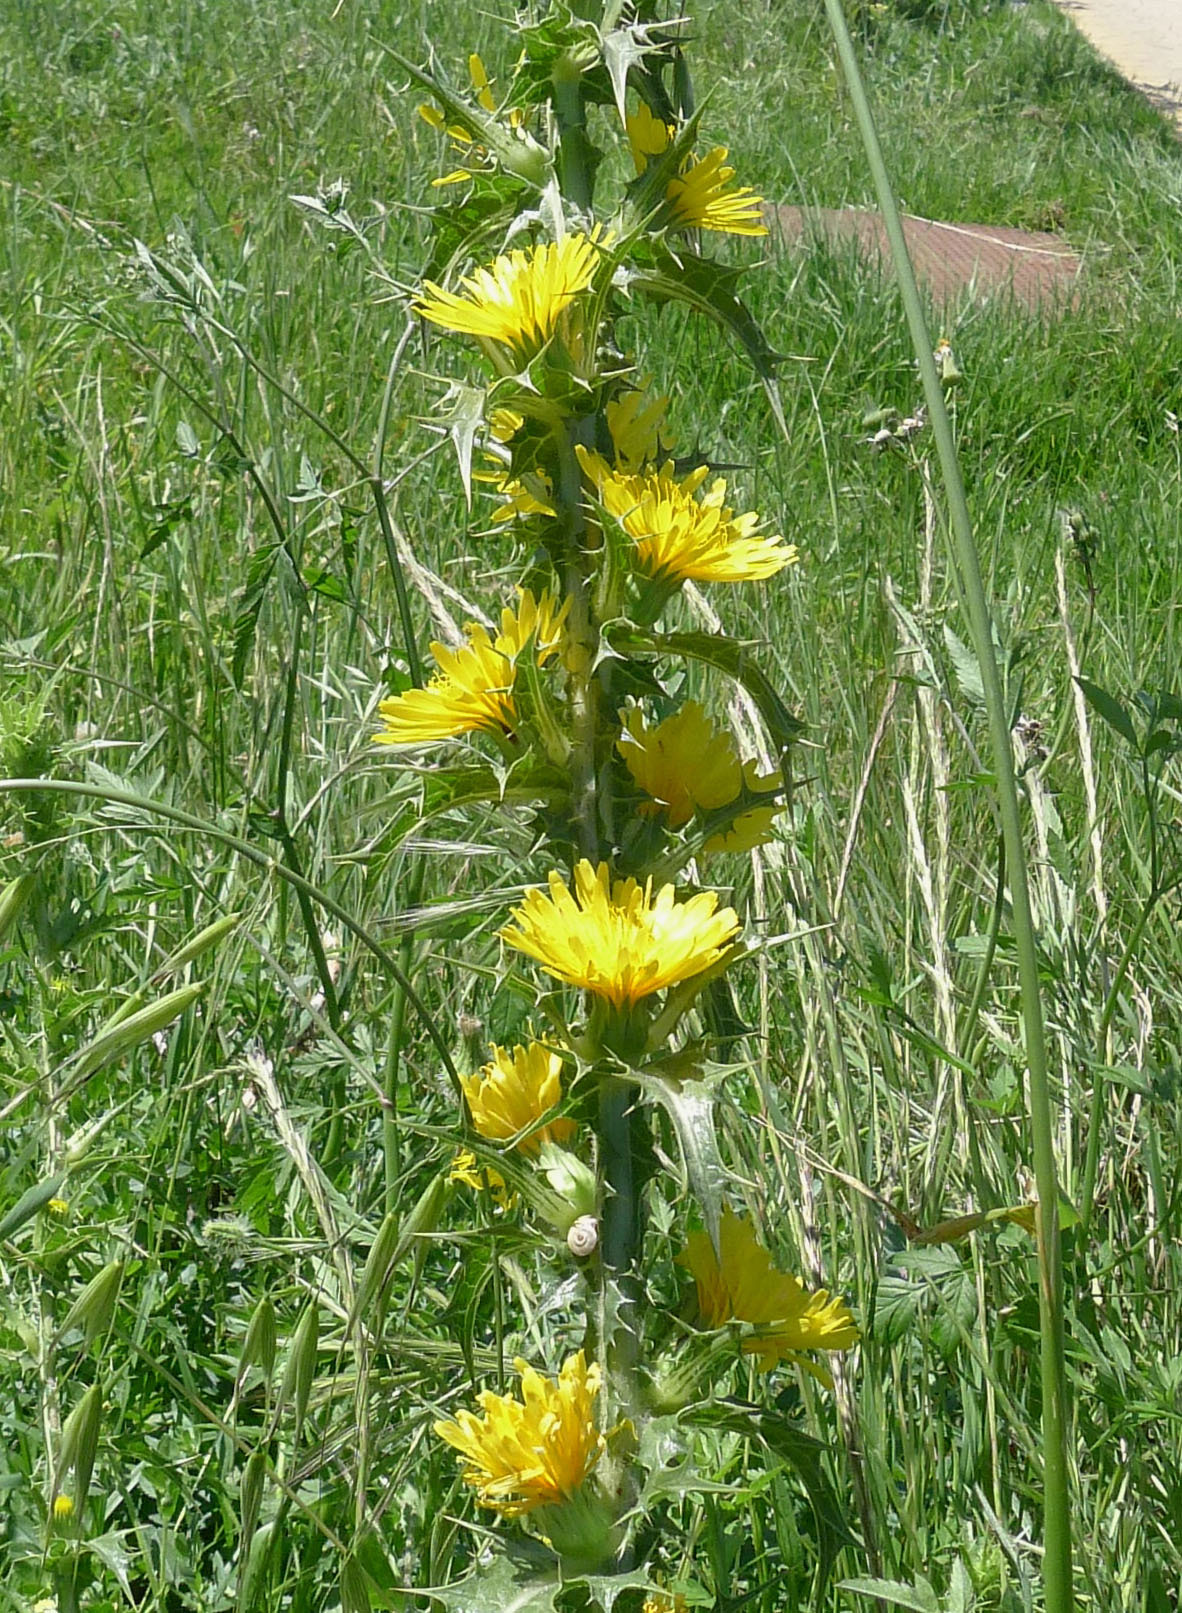 Scolymus hispanicus (rights holder: gailhampshire)